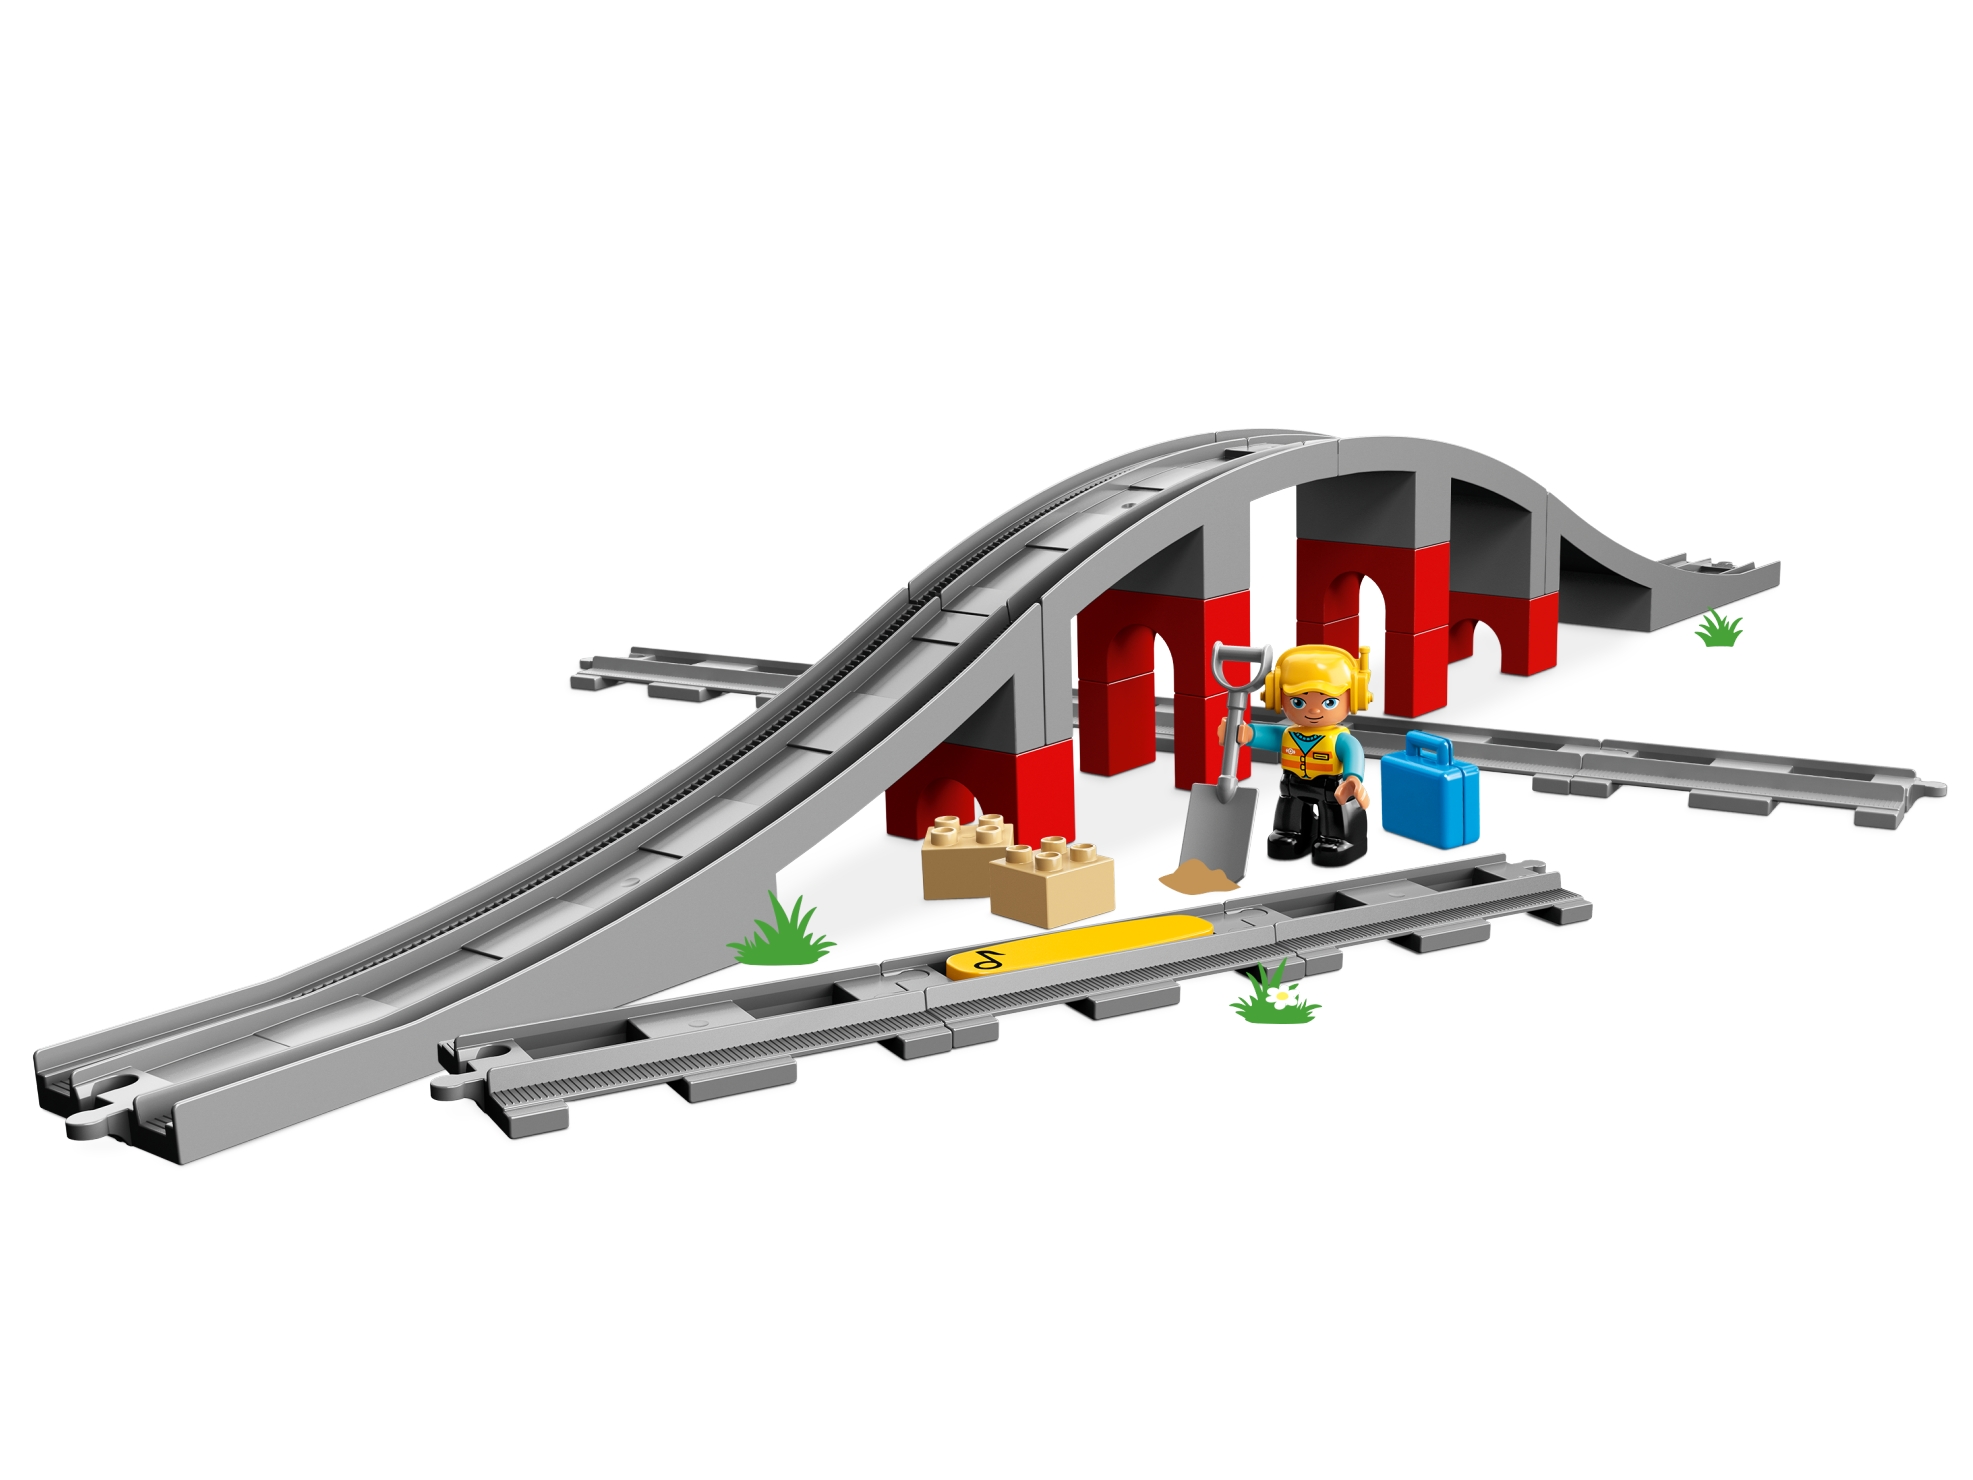 Es bunke pinion Train Bridge and Tracks 10872 | DUPLO® | Buy online at the Official LEGO®  Shop US